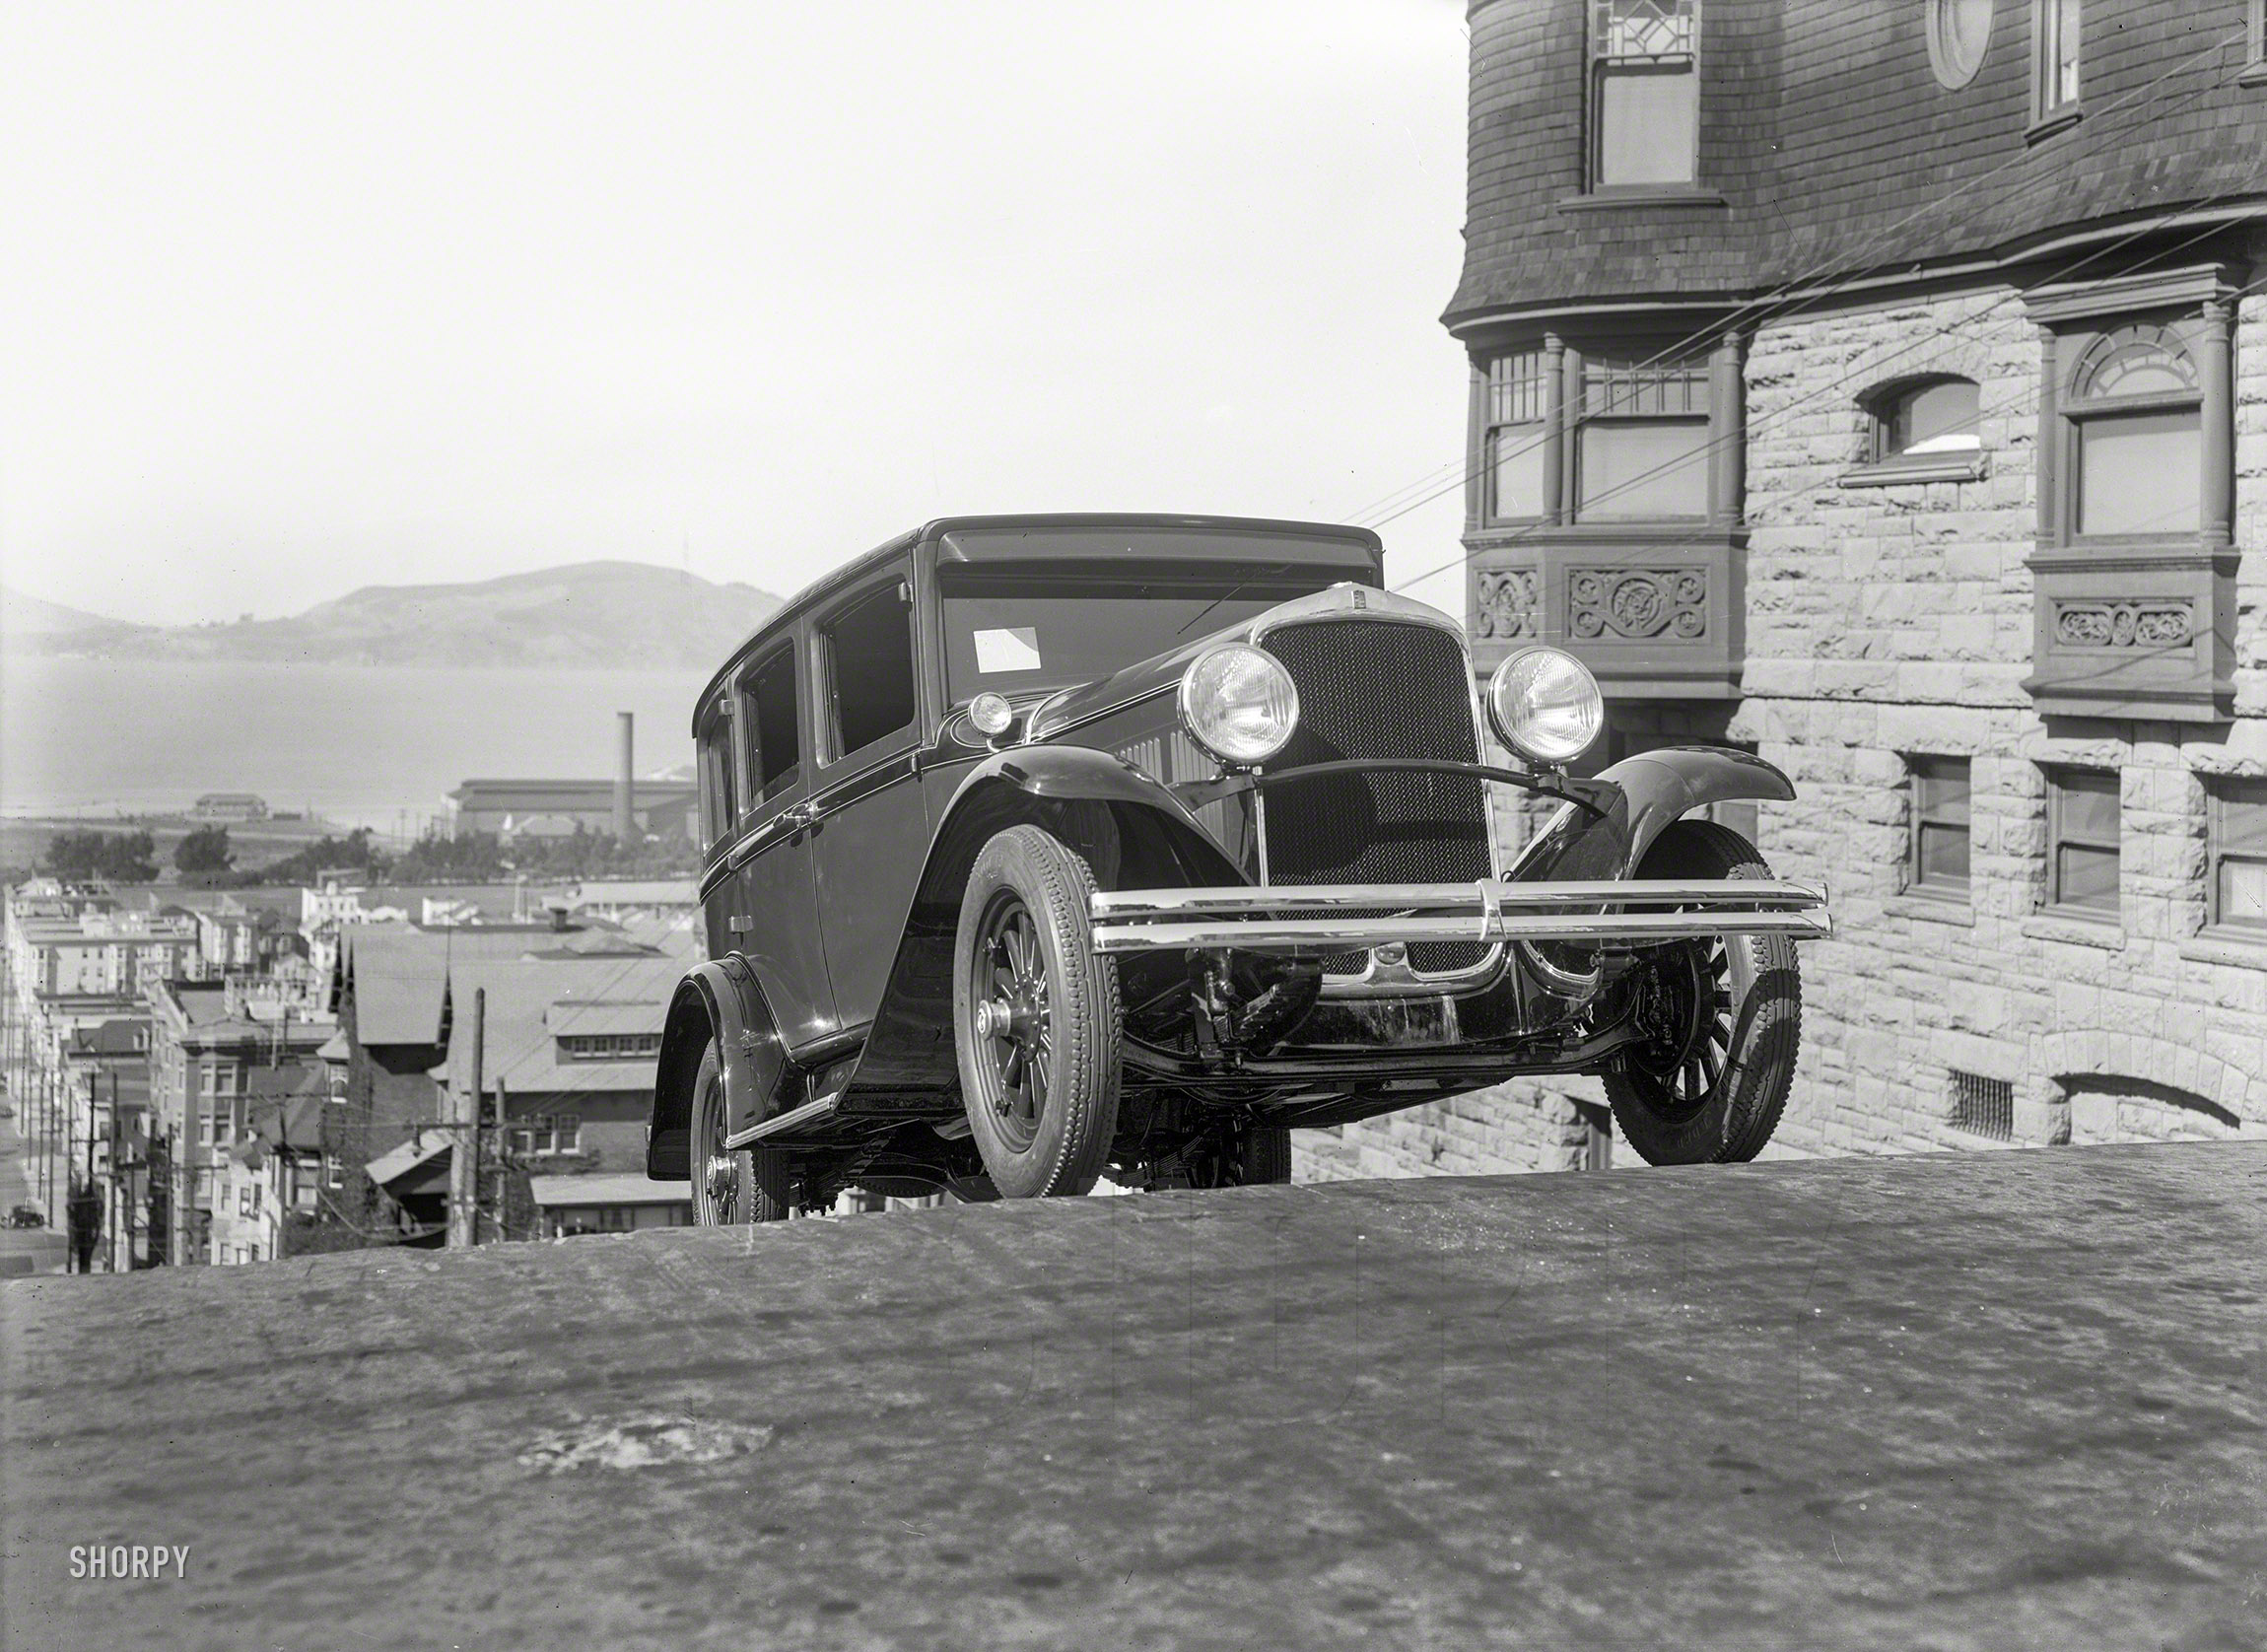 San Francisco circa 1928. "DeSoto sedan cresting hill." Last seen here a year ago, making steady progress up Webster Street toward points unknown. 5x7 inch glass negative by automotive impresario Christopher Helin. View full size.